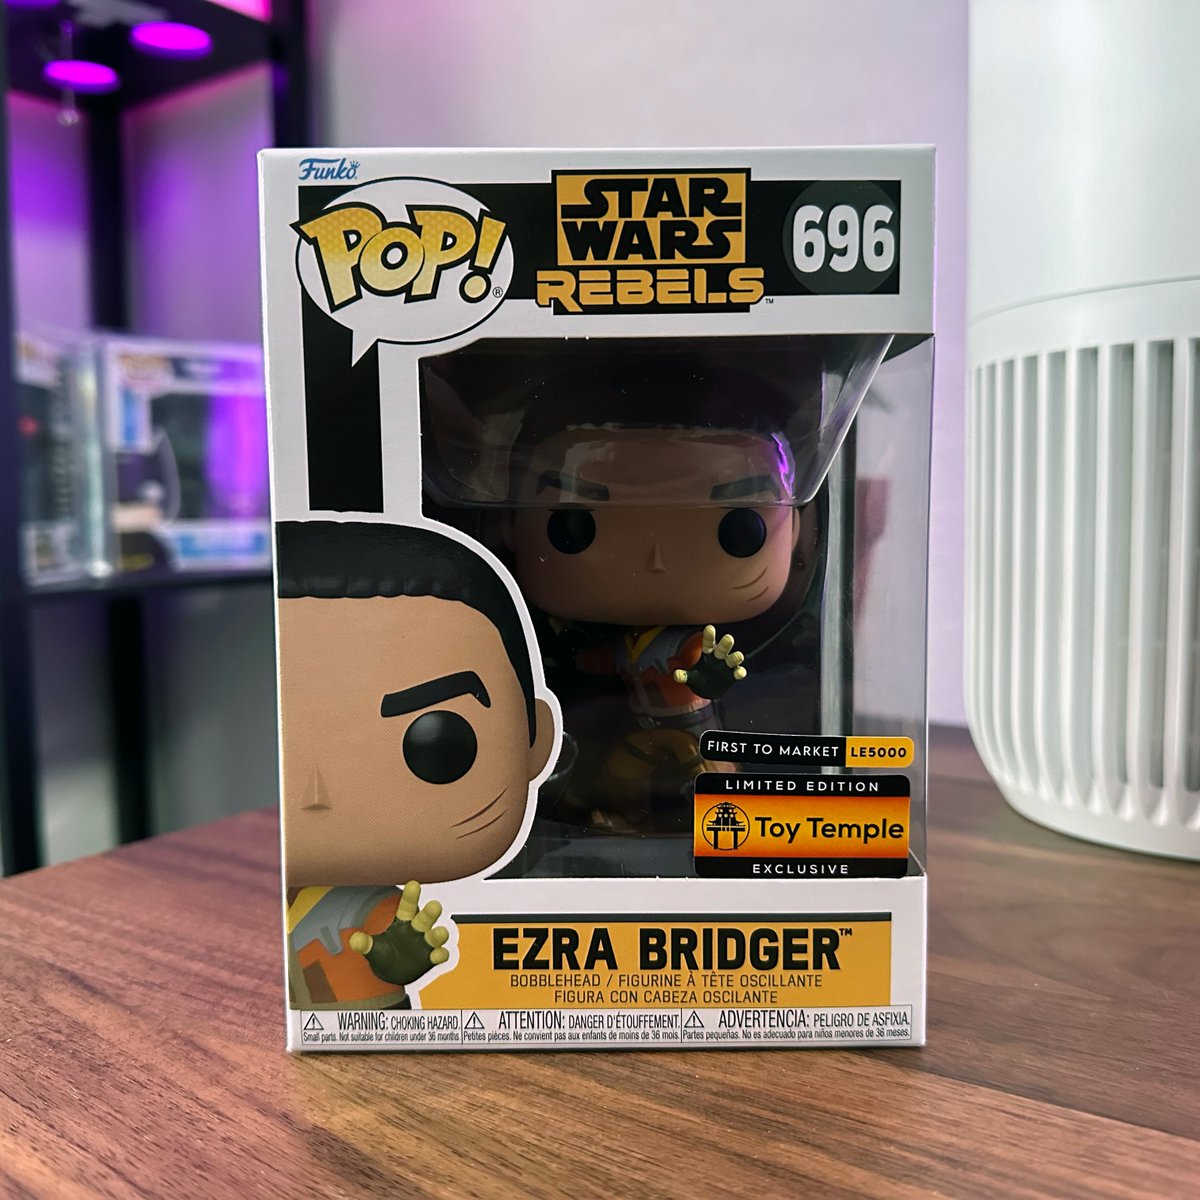 It's here! My Toy Temple Ezra Bridger Funko Pop! has arrived, complete with the exclusive First to Market LE5000 sticker.

#StarWars #StarWarsRebels #Funko #FunkoPop #FunkoPops #FunkoPopVinyl #Pop #PopVinyl #FunkoCollector #Collectible #Collectibles #Toy #Toys #FunkoFinderz